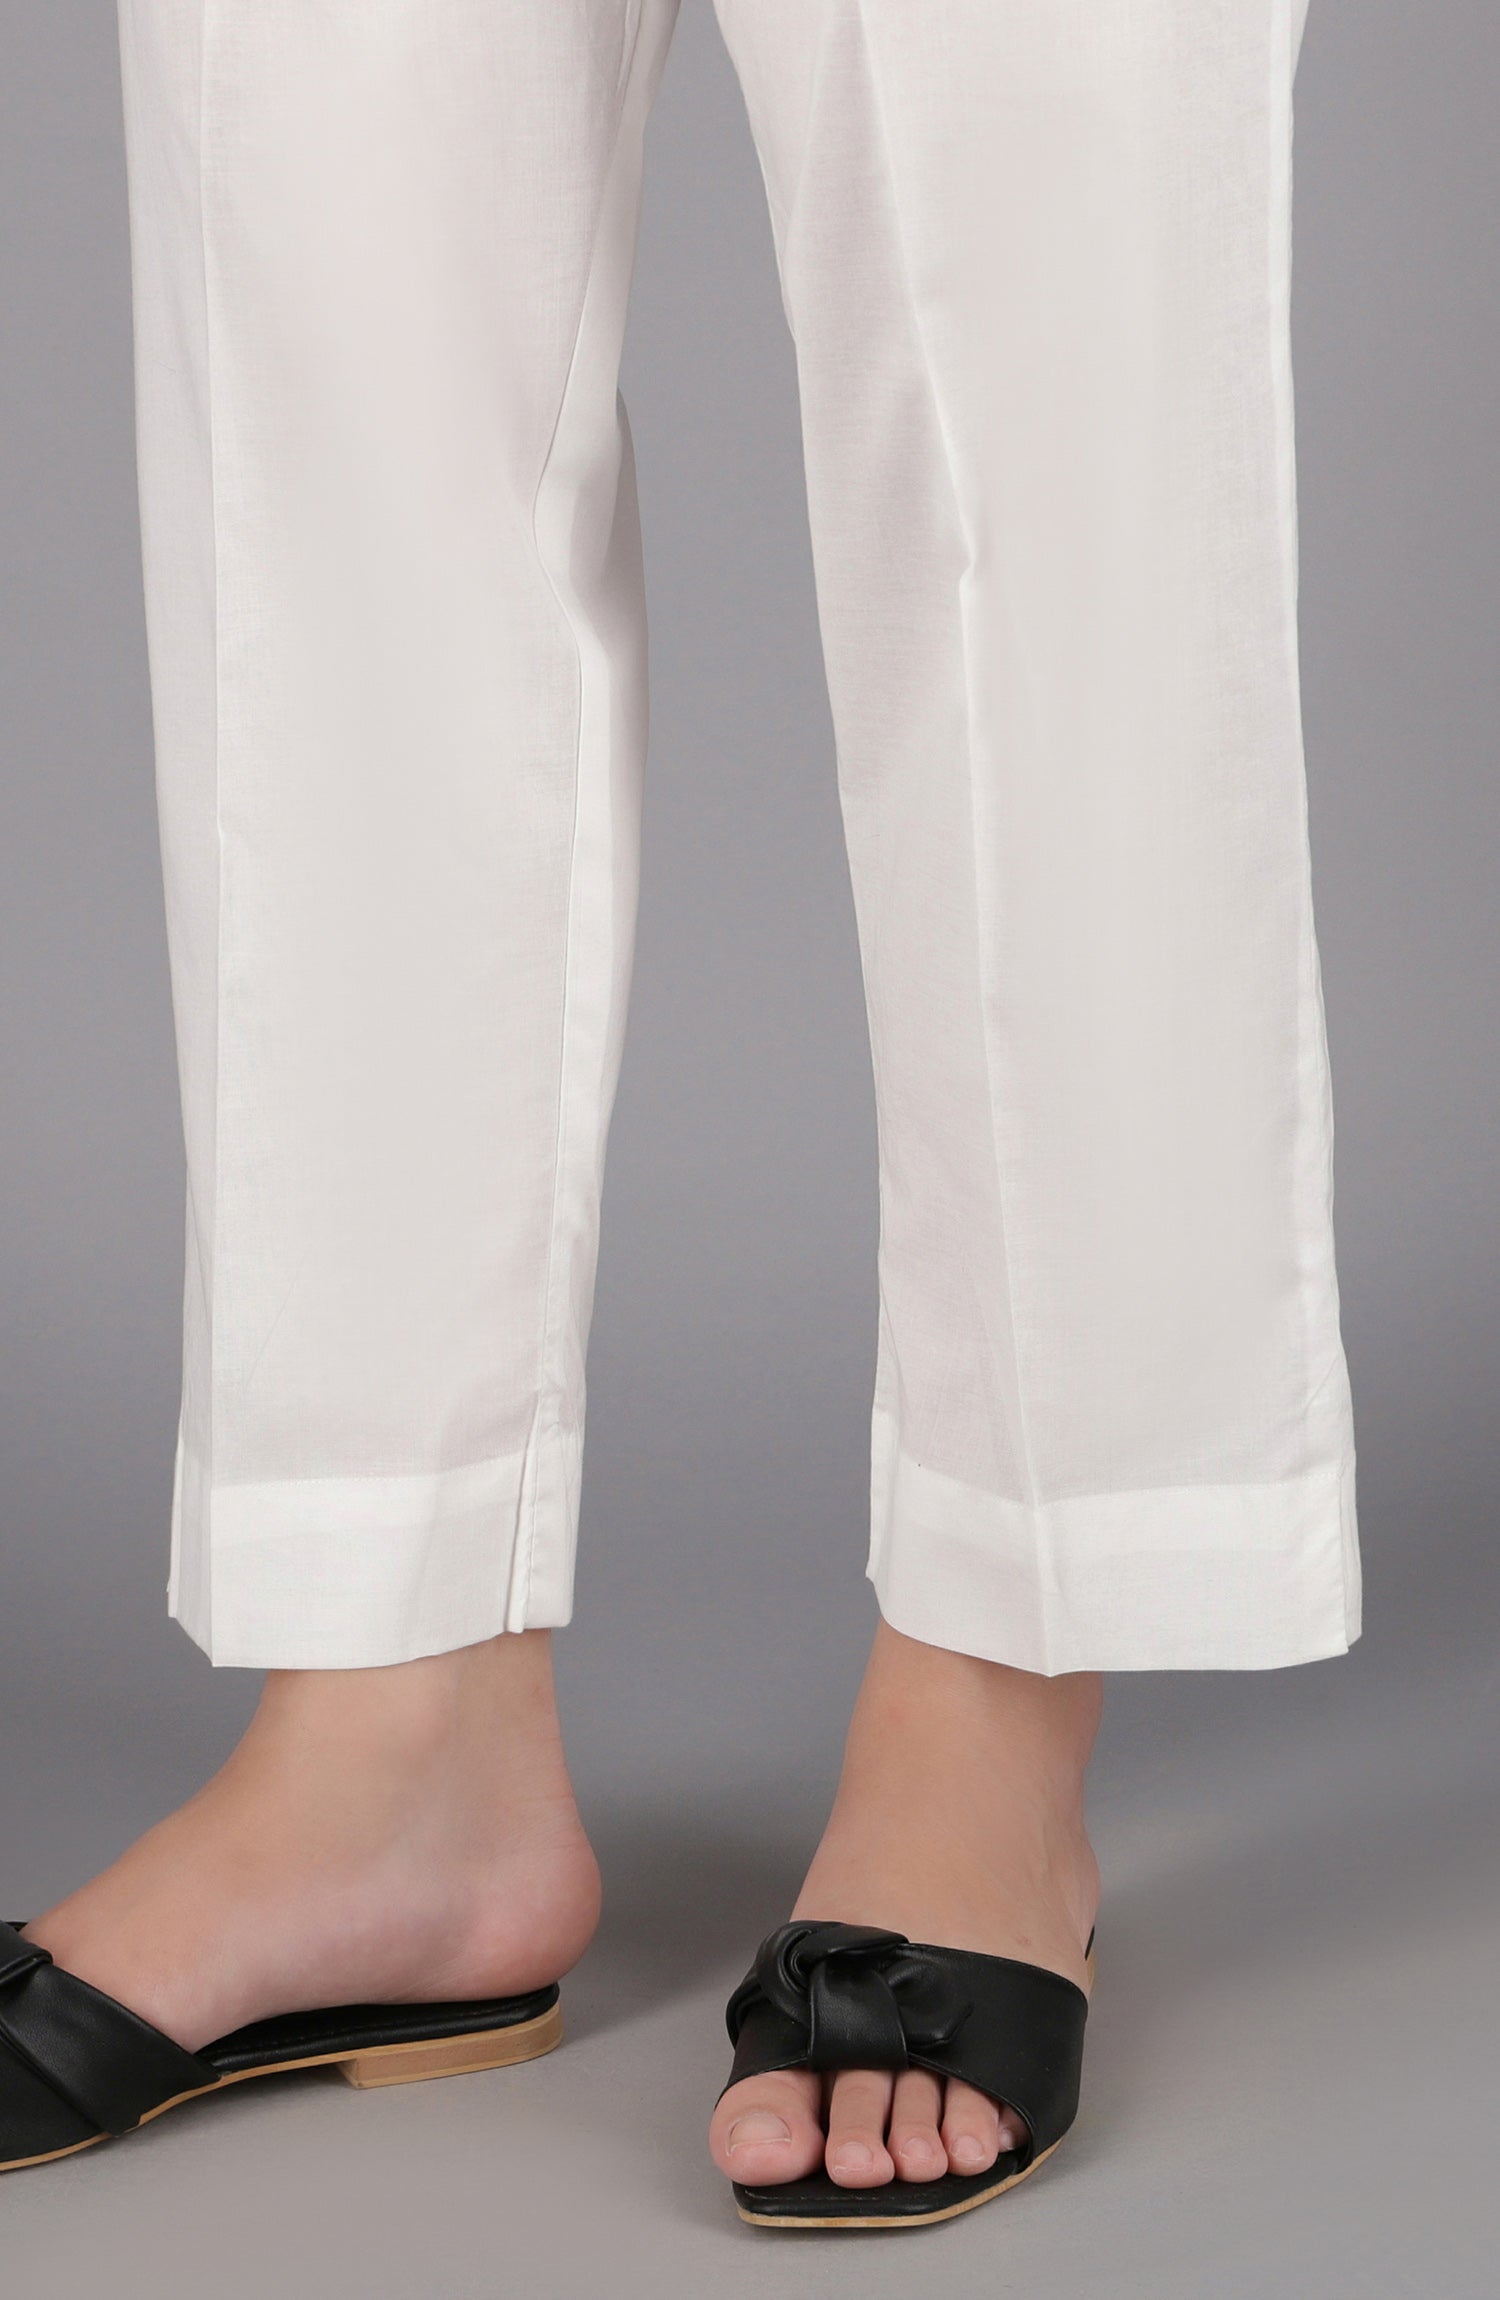 NRP-104/S WHITE CAMBRIC SCPANTS STITCHED BOTTOMS PANTS